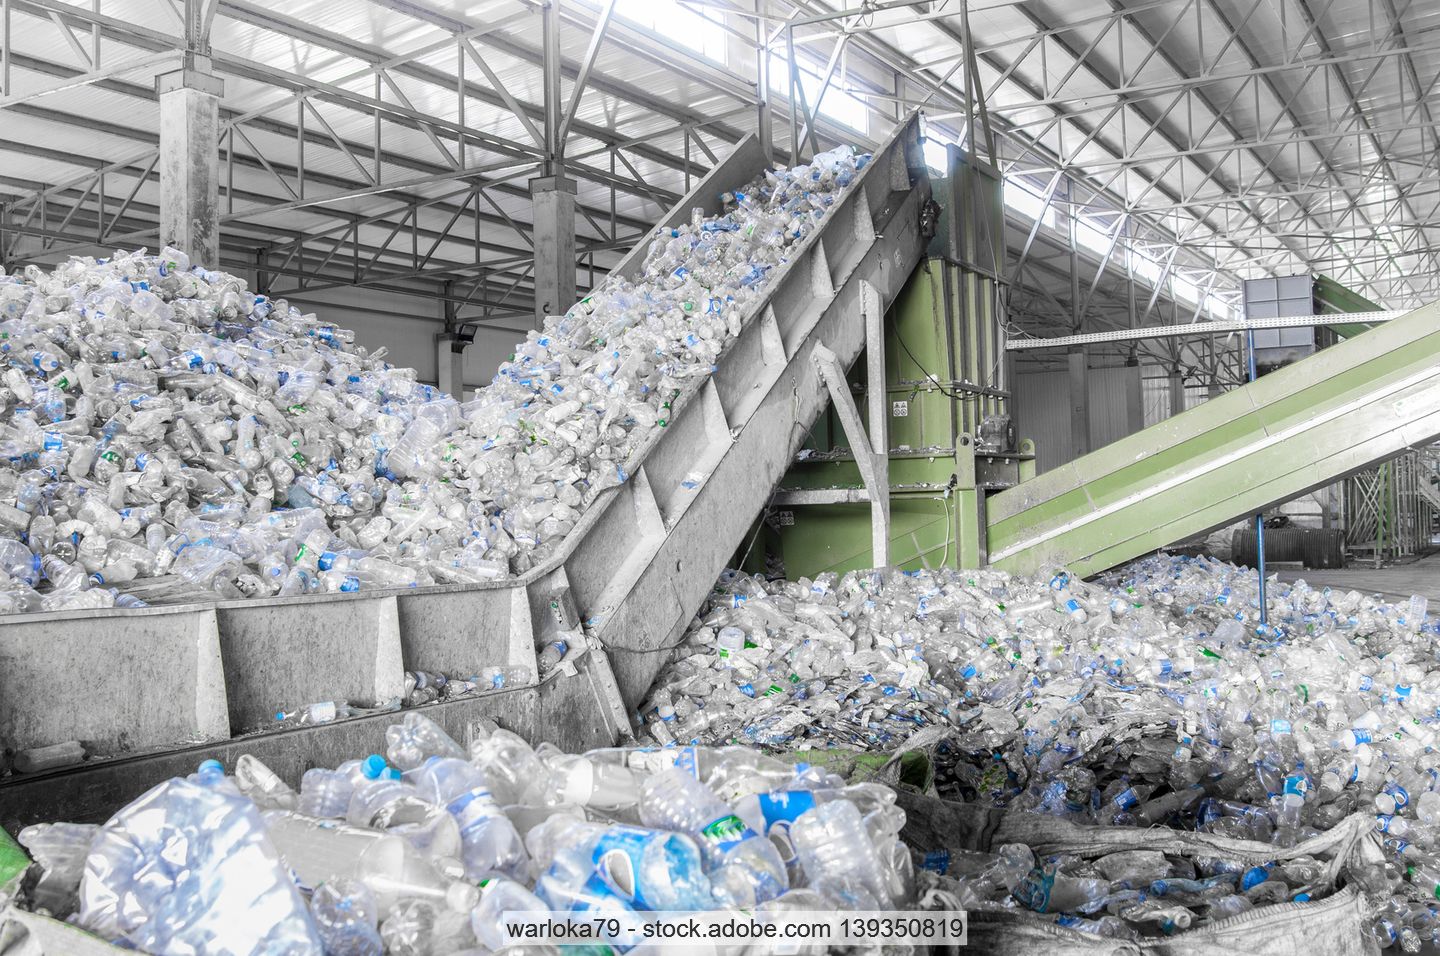 Conveyor in a PET recycling plant filled with clear transparent bottles.